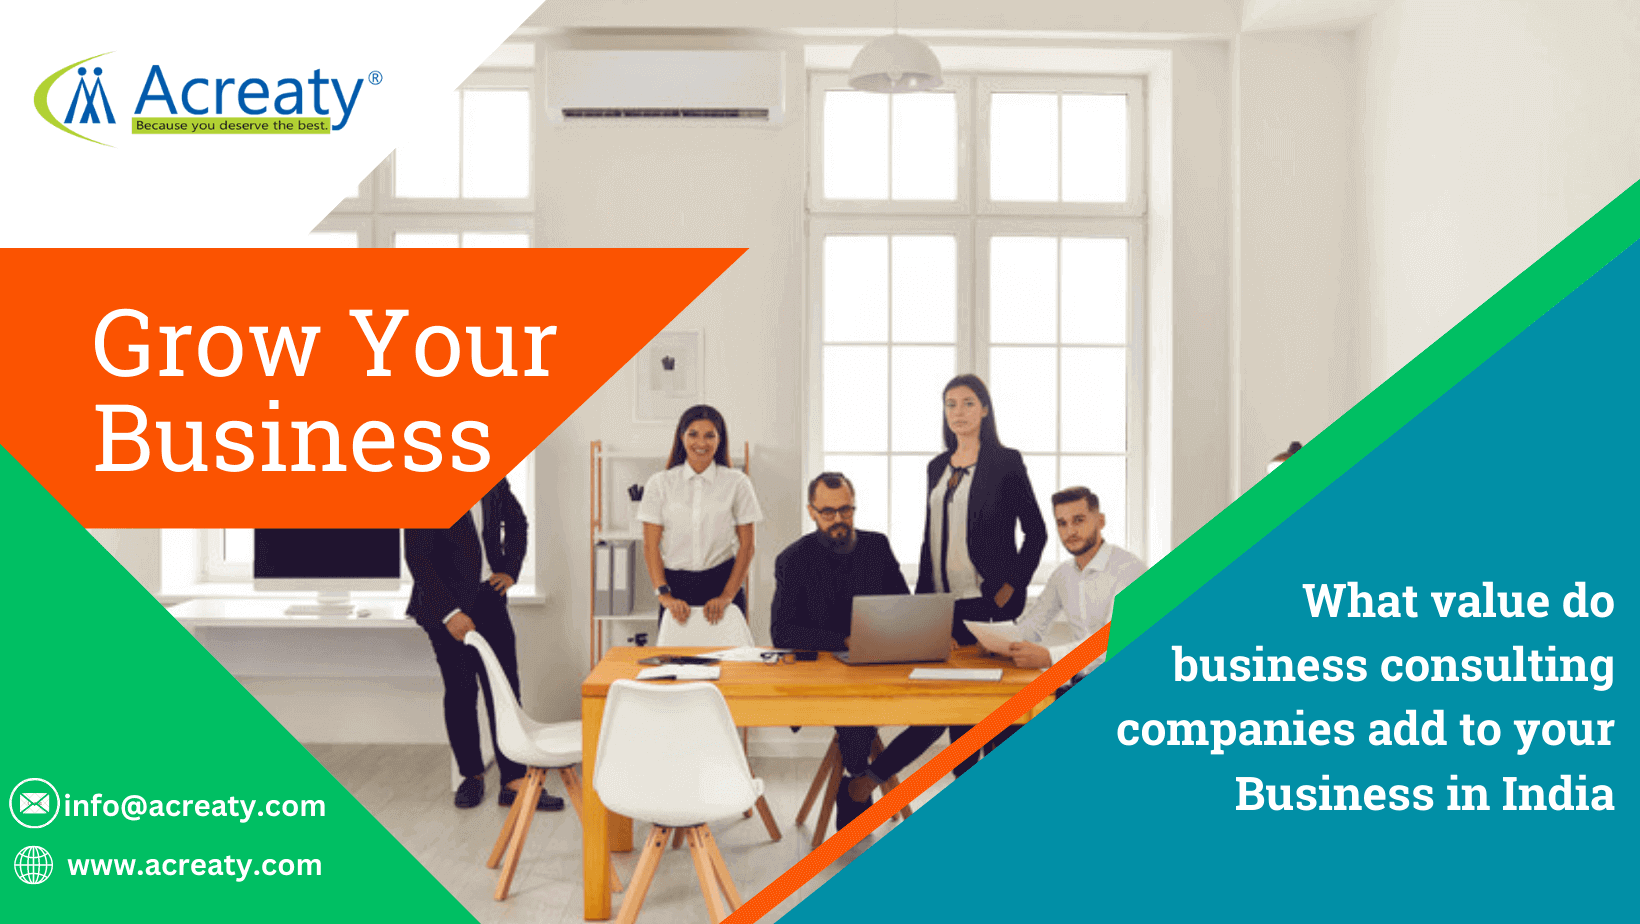 What value do business consulting companies add to your Business in India